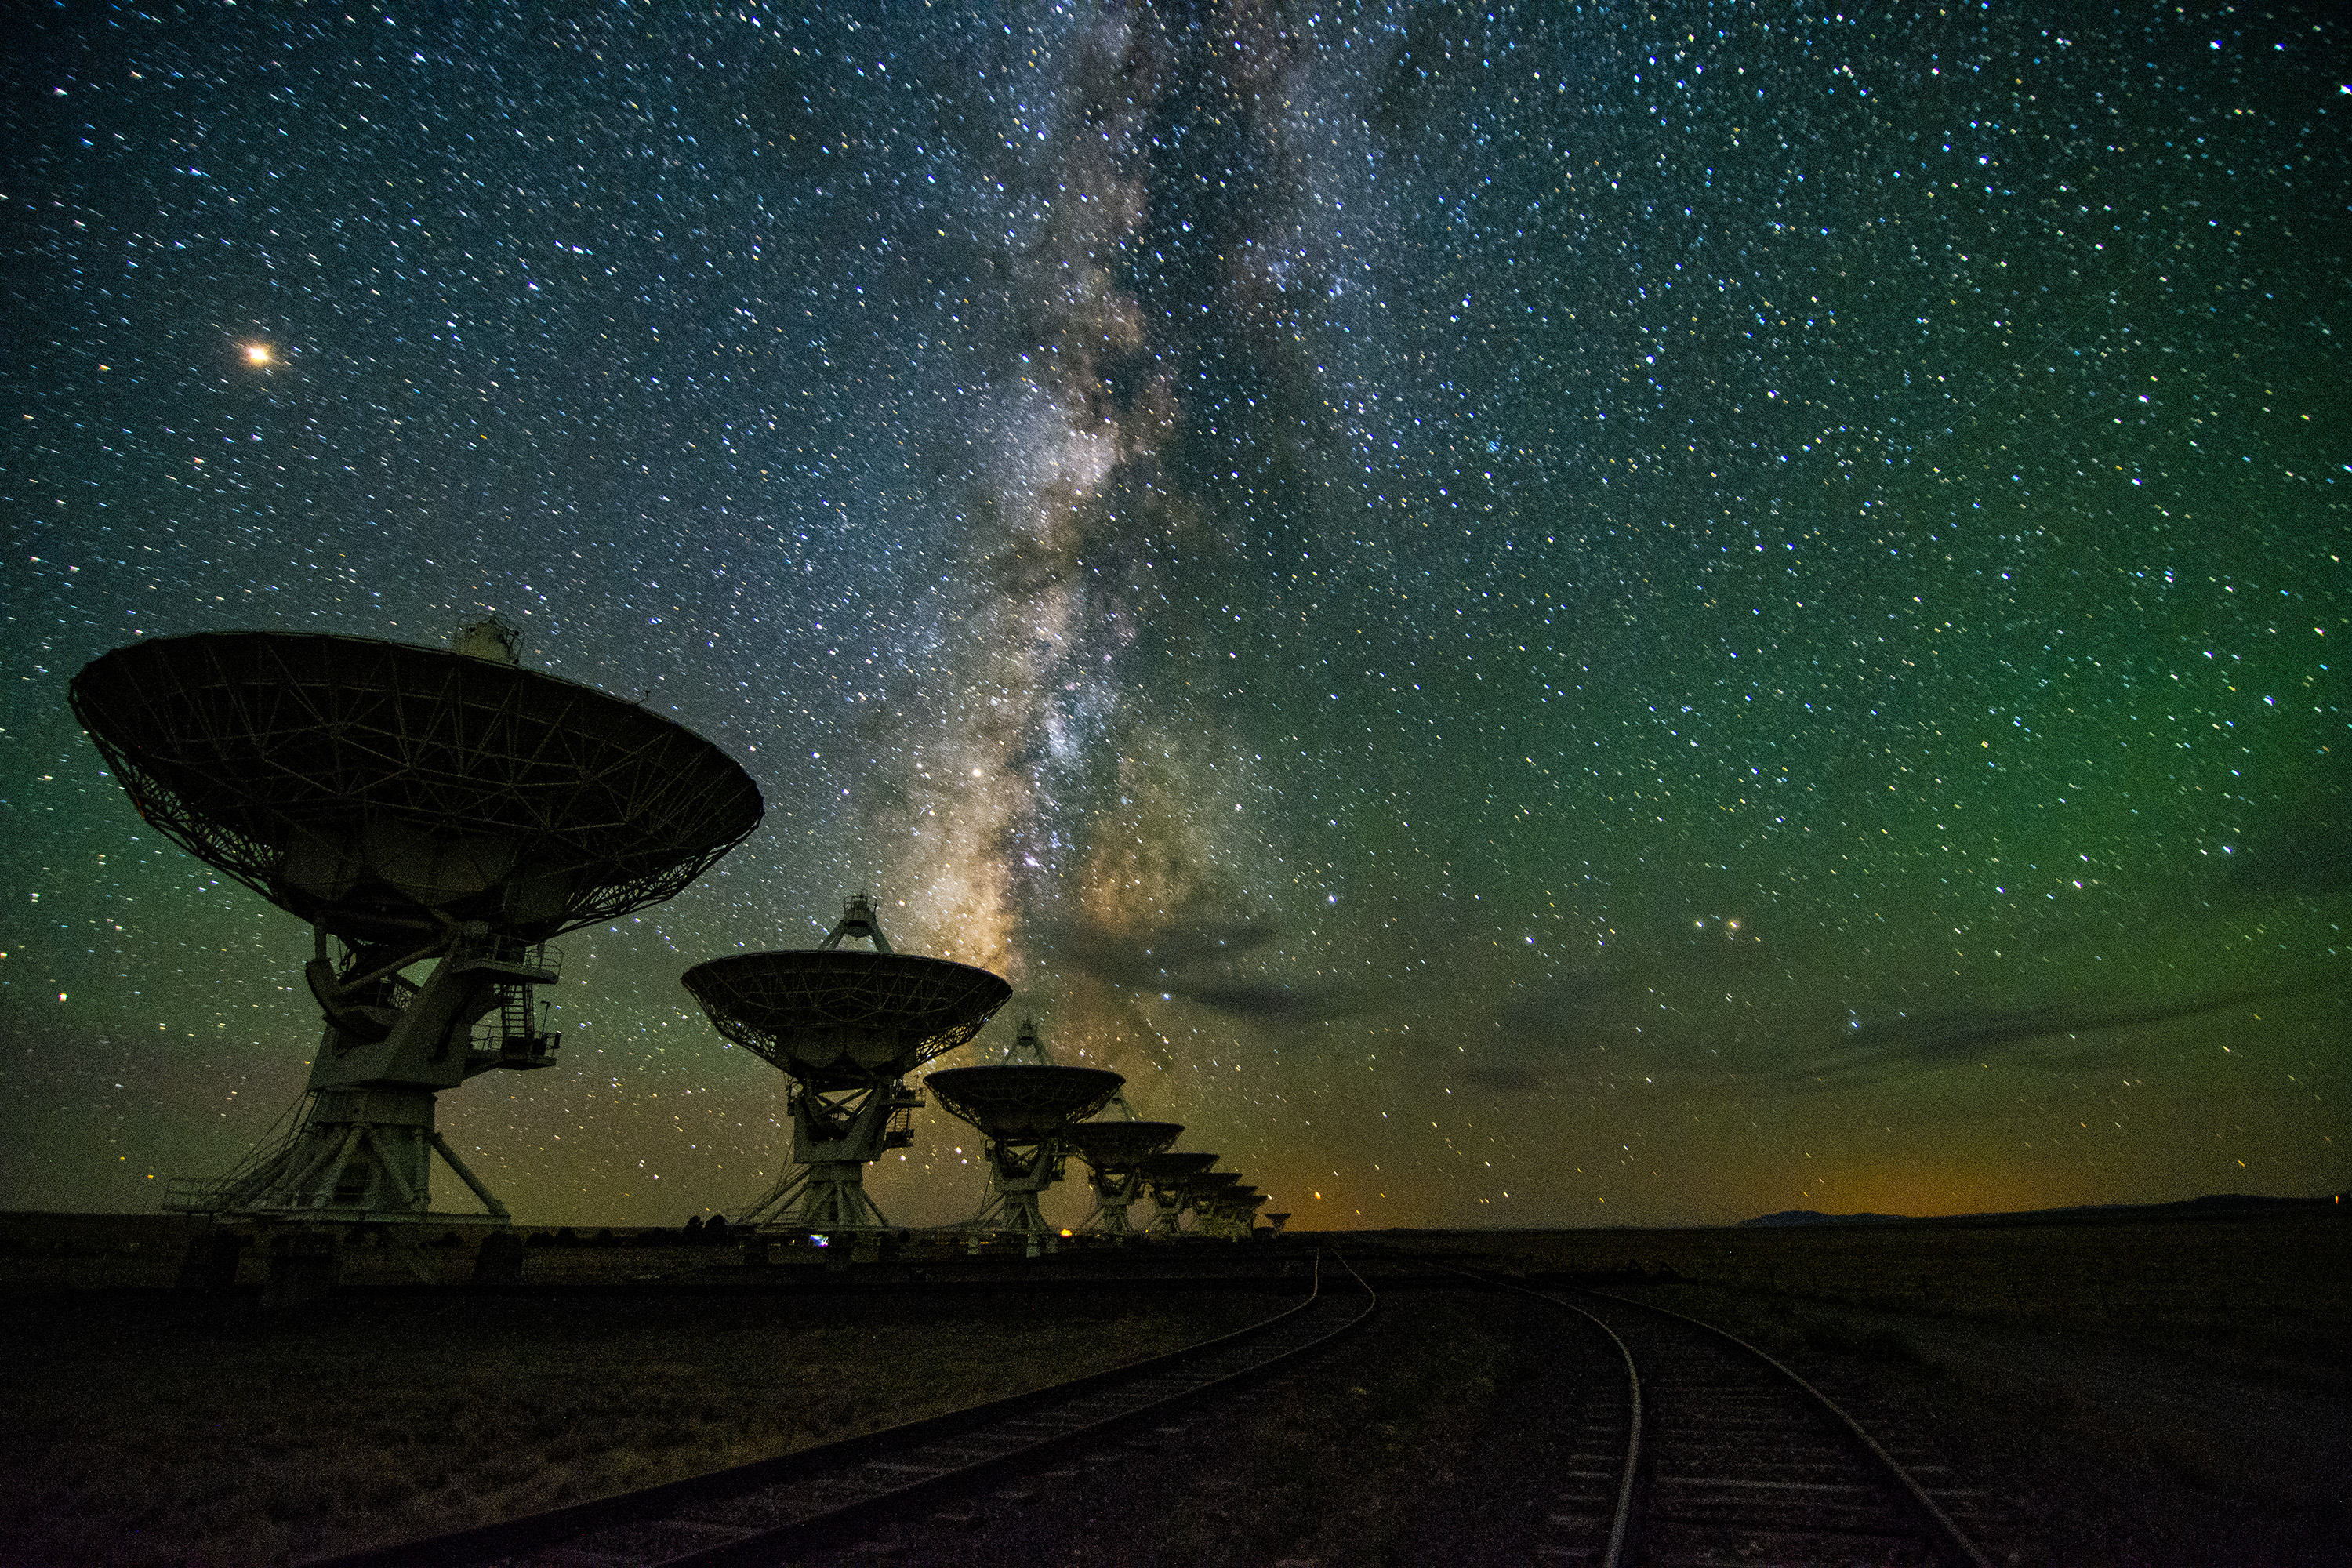 Dishes of the Karl G. Jansky Very Large Array in New Mexico line up beneath the starry sky. Radio waves are just one of the numerous signals from space that comprise the soundtrack of the cosmos.